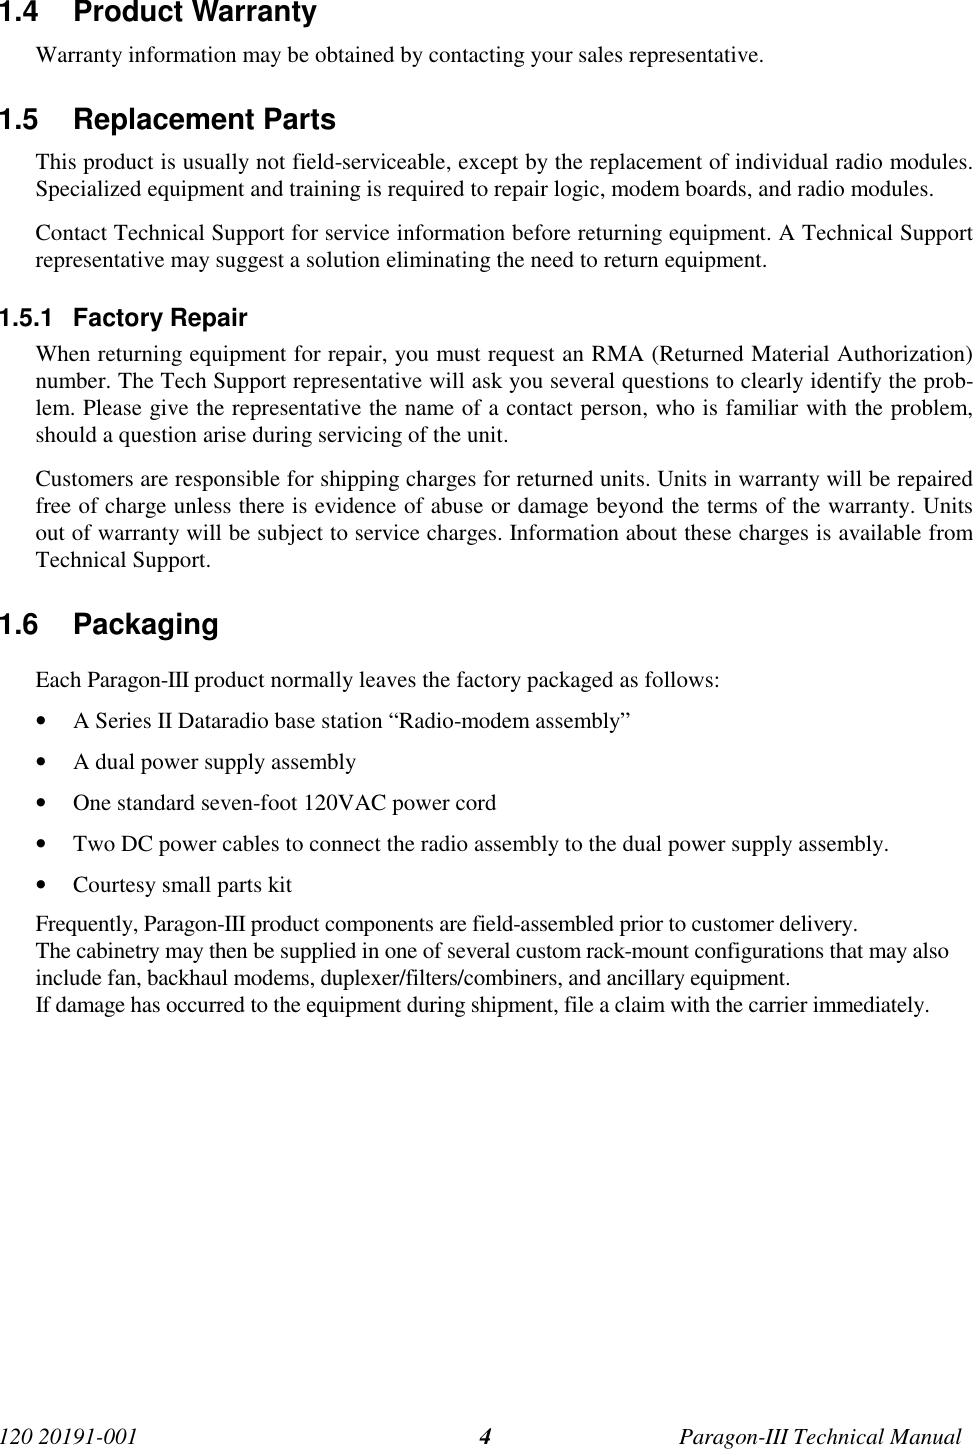 120 20191-001 Paragon-III Technical Manual41.4 Product Warranty Warranty information may be obtained by contacting your sales representative.1.5 Replacement Parts This product is usually not field-serviceable, except by the replacement of individual radio modules.Specialized equipment and training is required to repair logic, modem boards, and radio modules. Contact Technical Support for service information before returning equipment. A Technical Supportrepresentative may suggest a solution eliminating the need to return equipment.1.5.1 Factory Repair When returning equipment for repair, you must request an RMA (Returned Material Authorization)number. The Tech Support representative will ask you several questions to clearly identify the prob-lem. Please give the representative the name of a contact person, who is familiar with the problem,should a question arise during servicing of the unit. Customers are responsible for shipping charges for returned units. Units in warranty will be repairedfree of charge unless there is evidence of abuse or damage beyond the terms of the warranty. Unitsout of warranty will be subject to service charges. Information about these charges is available fromTechnical Support.1.6 PackagingEach Paragon-III product normally leaves the factory packaged as follows:• A Series II Dataradio base station “Radio-modem assembly”• A dual power supply assembly• One standard seven-foot 120VAC power cord• Two DC power cables to connect the radio assembly to the dual power supply assembly.• Courtesy small parts kitFrequently, Paragon-III product components are field-assembled prior to customer delivery.The cabinetry may then be supplied in one of several custom rack-mount configurations that may alsoinclude fan, backhaul modems, duplexer/filters/combiners, and ancillary equipment.If damage has occurred to the equipment during shipment, file a claim with the carrier immediately.